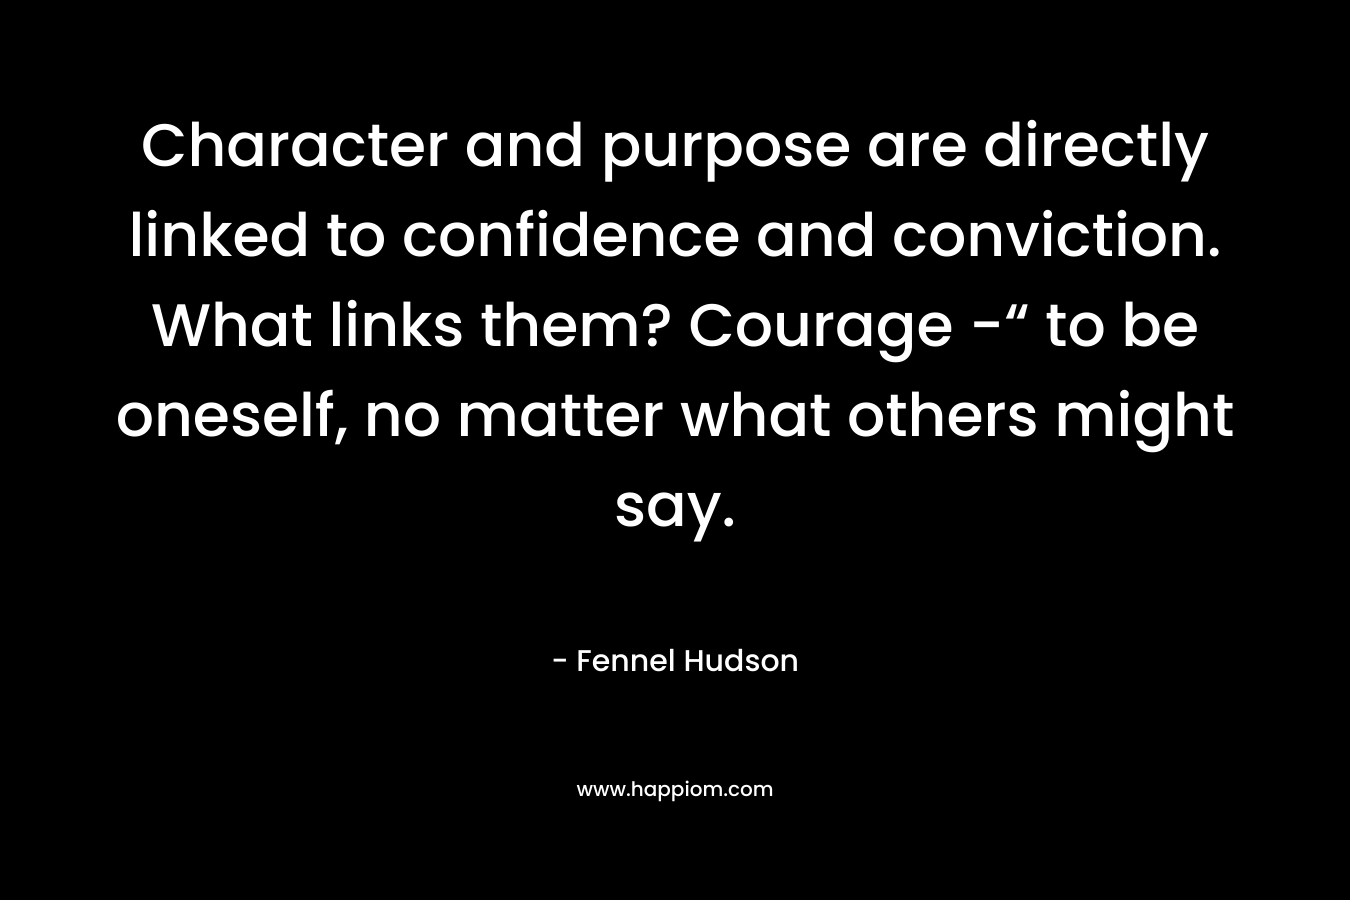 Character and purpose are directly linked to confidence and conviction. What links them? Courage -“ to be oneself, no matter what others might say.